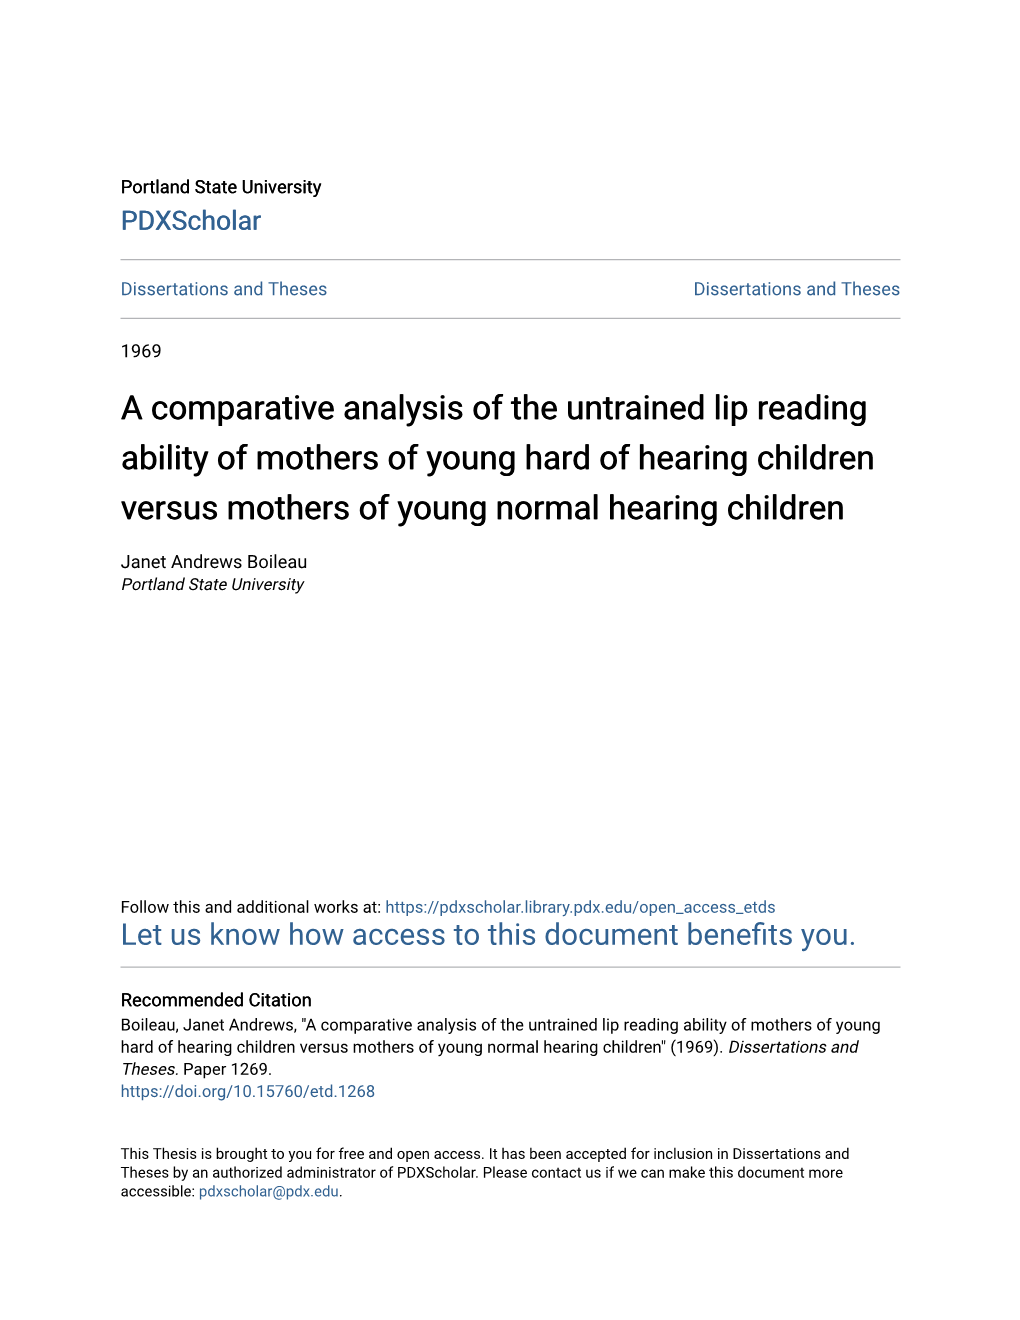 A Comparative Analysis of the Untrained Lip Reading Ability of Mothers of Young Hard of Hearing Children Versus Mothers of Young Normal Hearing Children